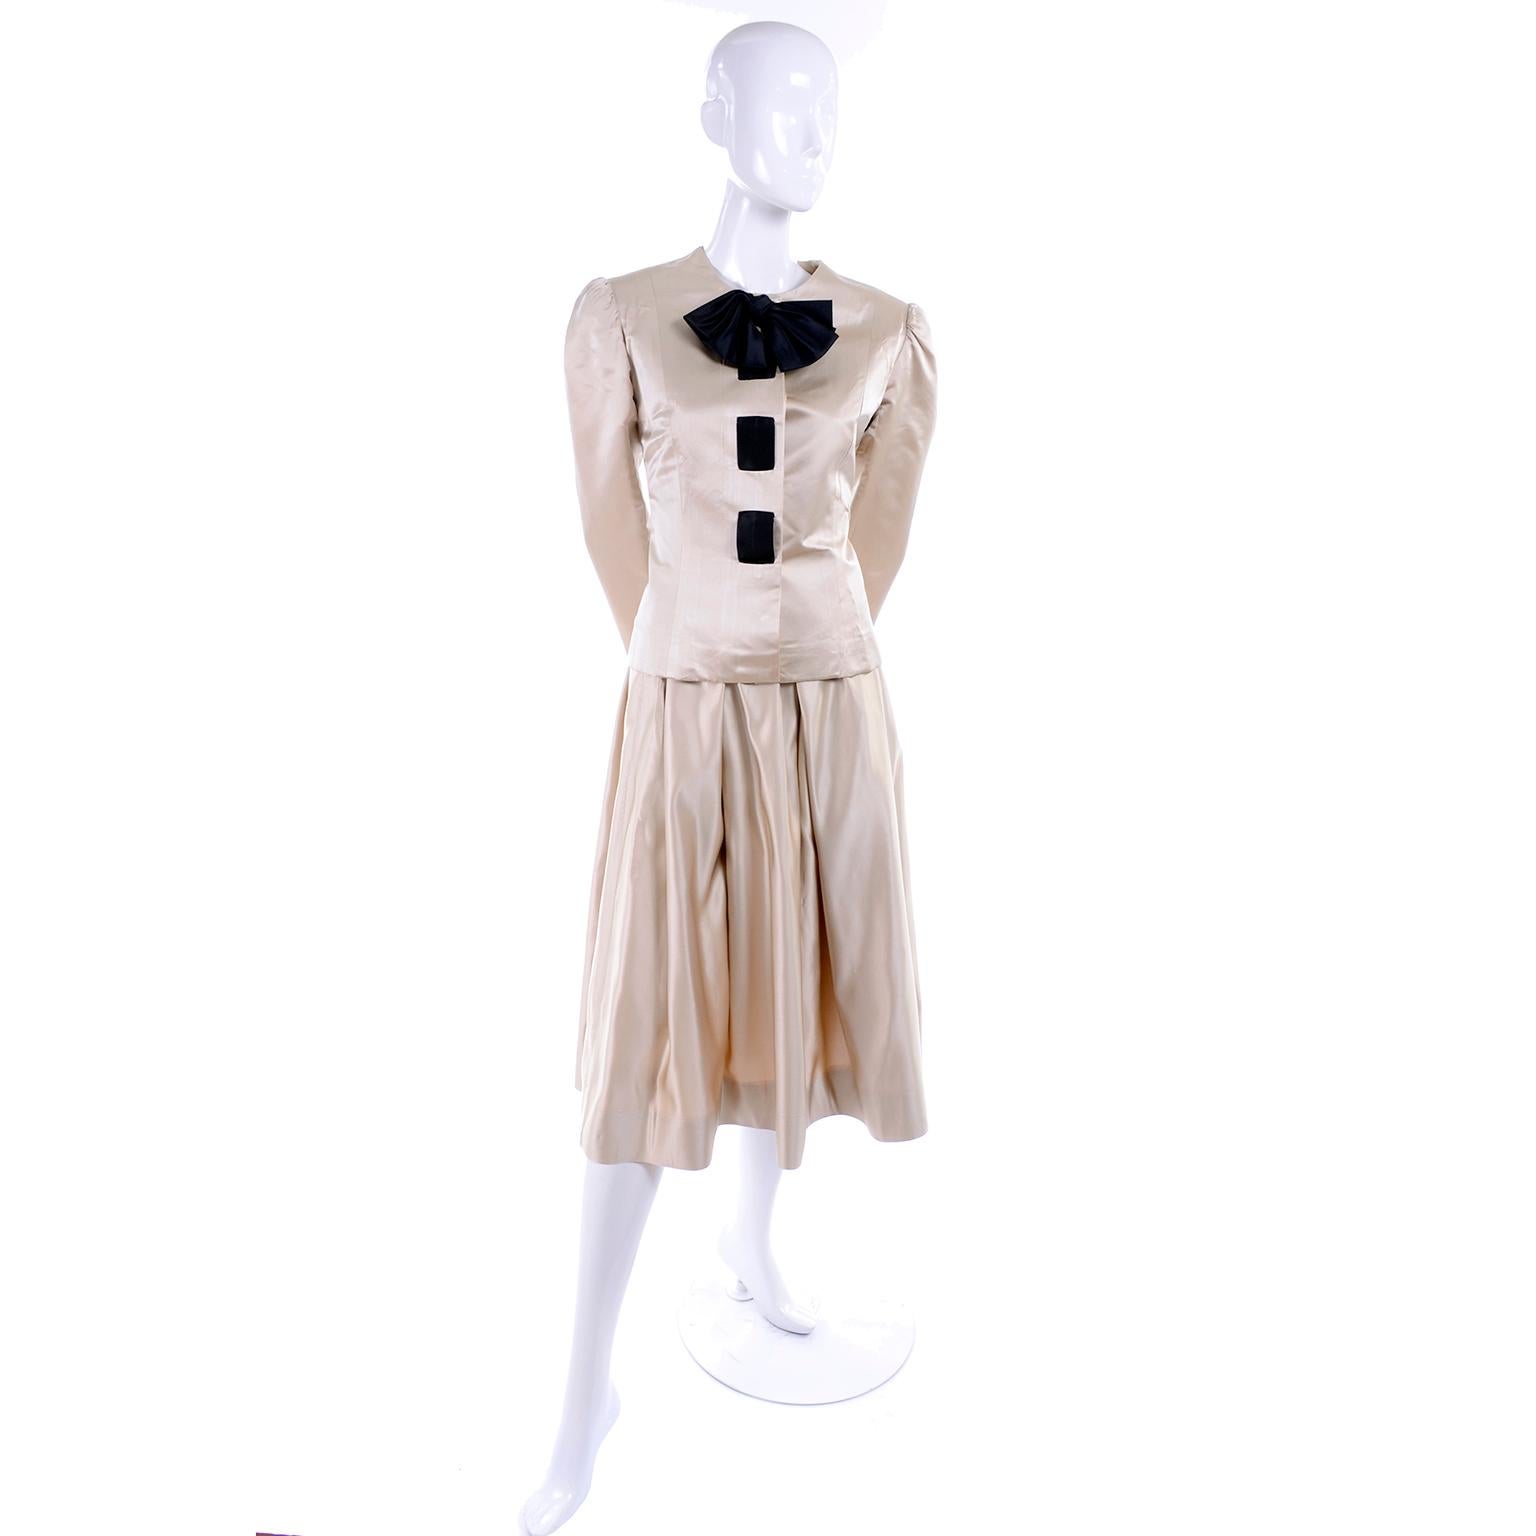 This lovely 2 piece dress or suit is from Albert Nipon and we think it's fabulous! We have developed such a new appreciation for Albert Nipon and have been searching for his earlier pieces! This beautiful ensemble is in a neutral fawn beige silk and